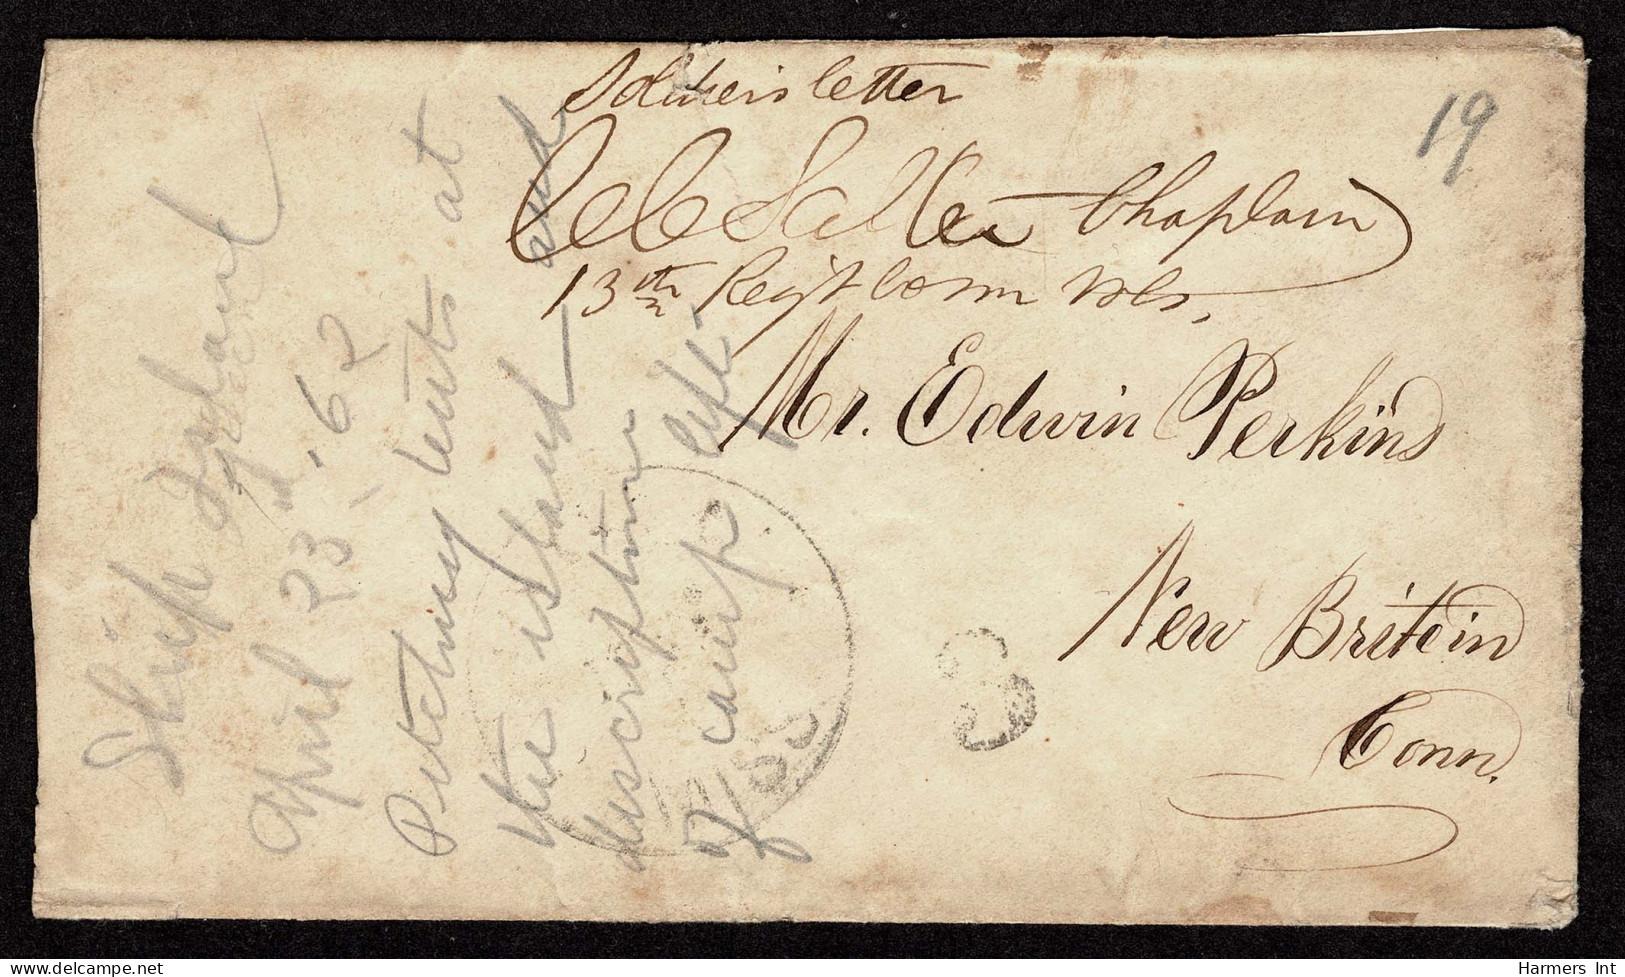 Lot # 083 Confederate States: 1860's Four stampless envelopes all addressed to the Perkins family in New Britain Conn, T